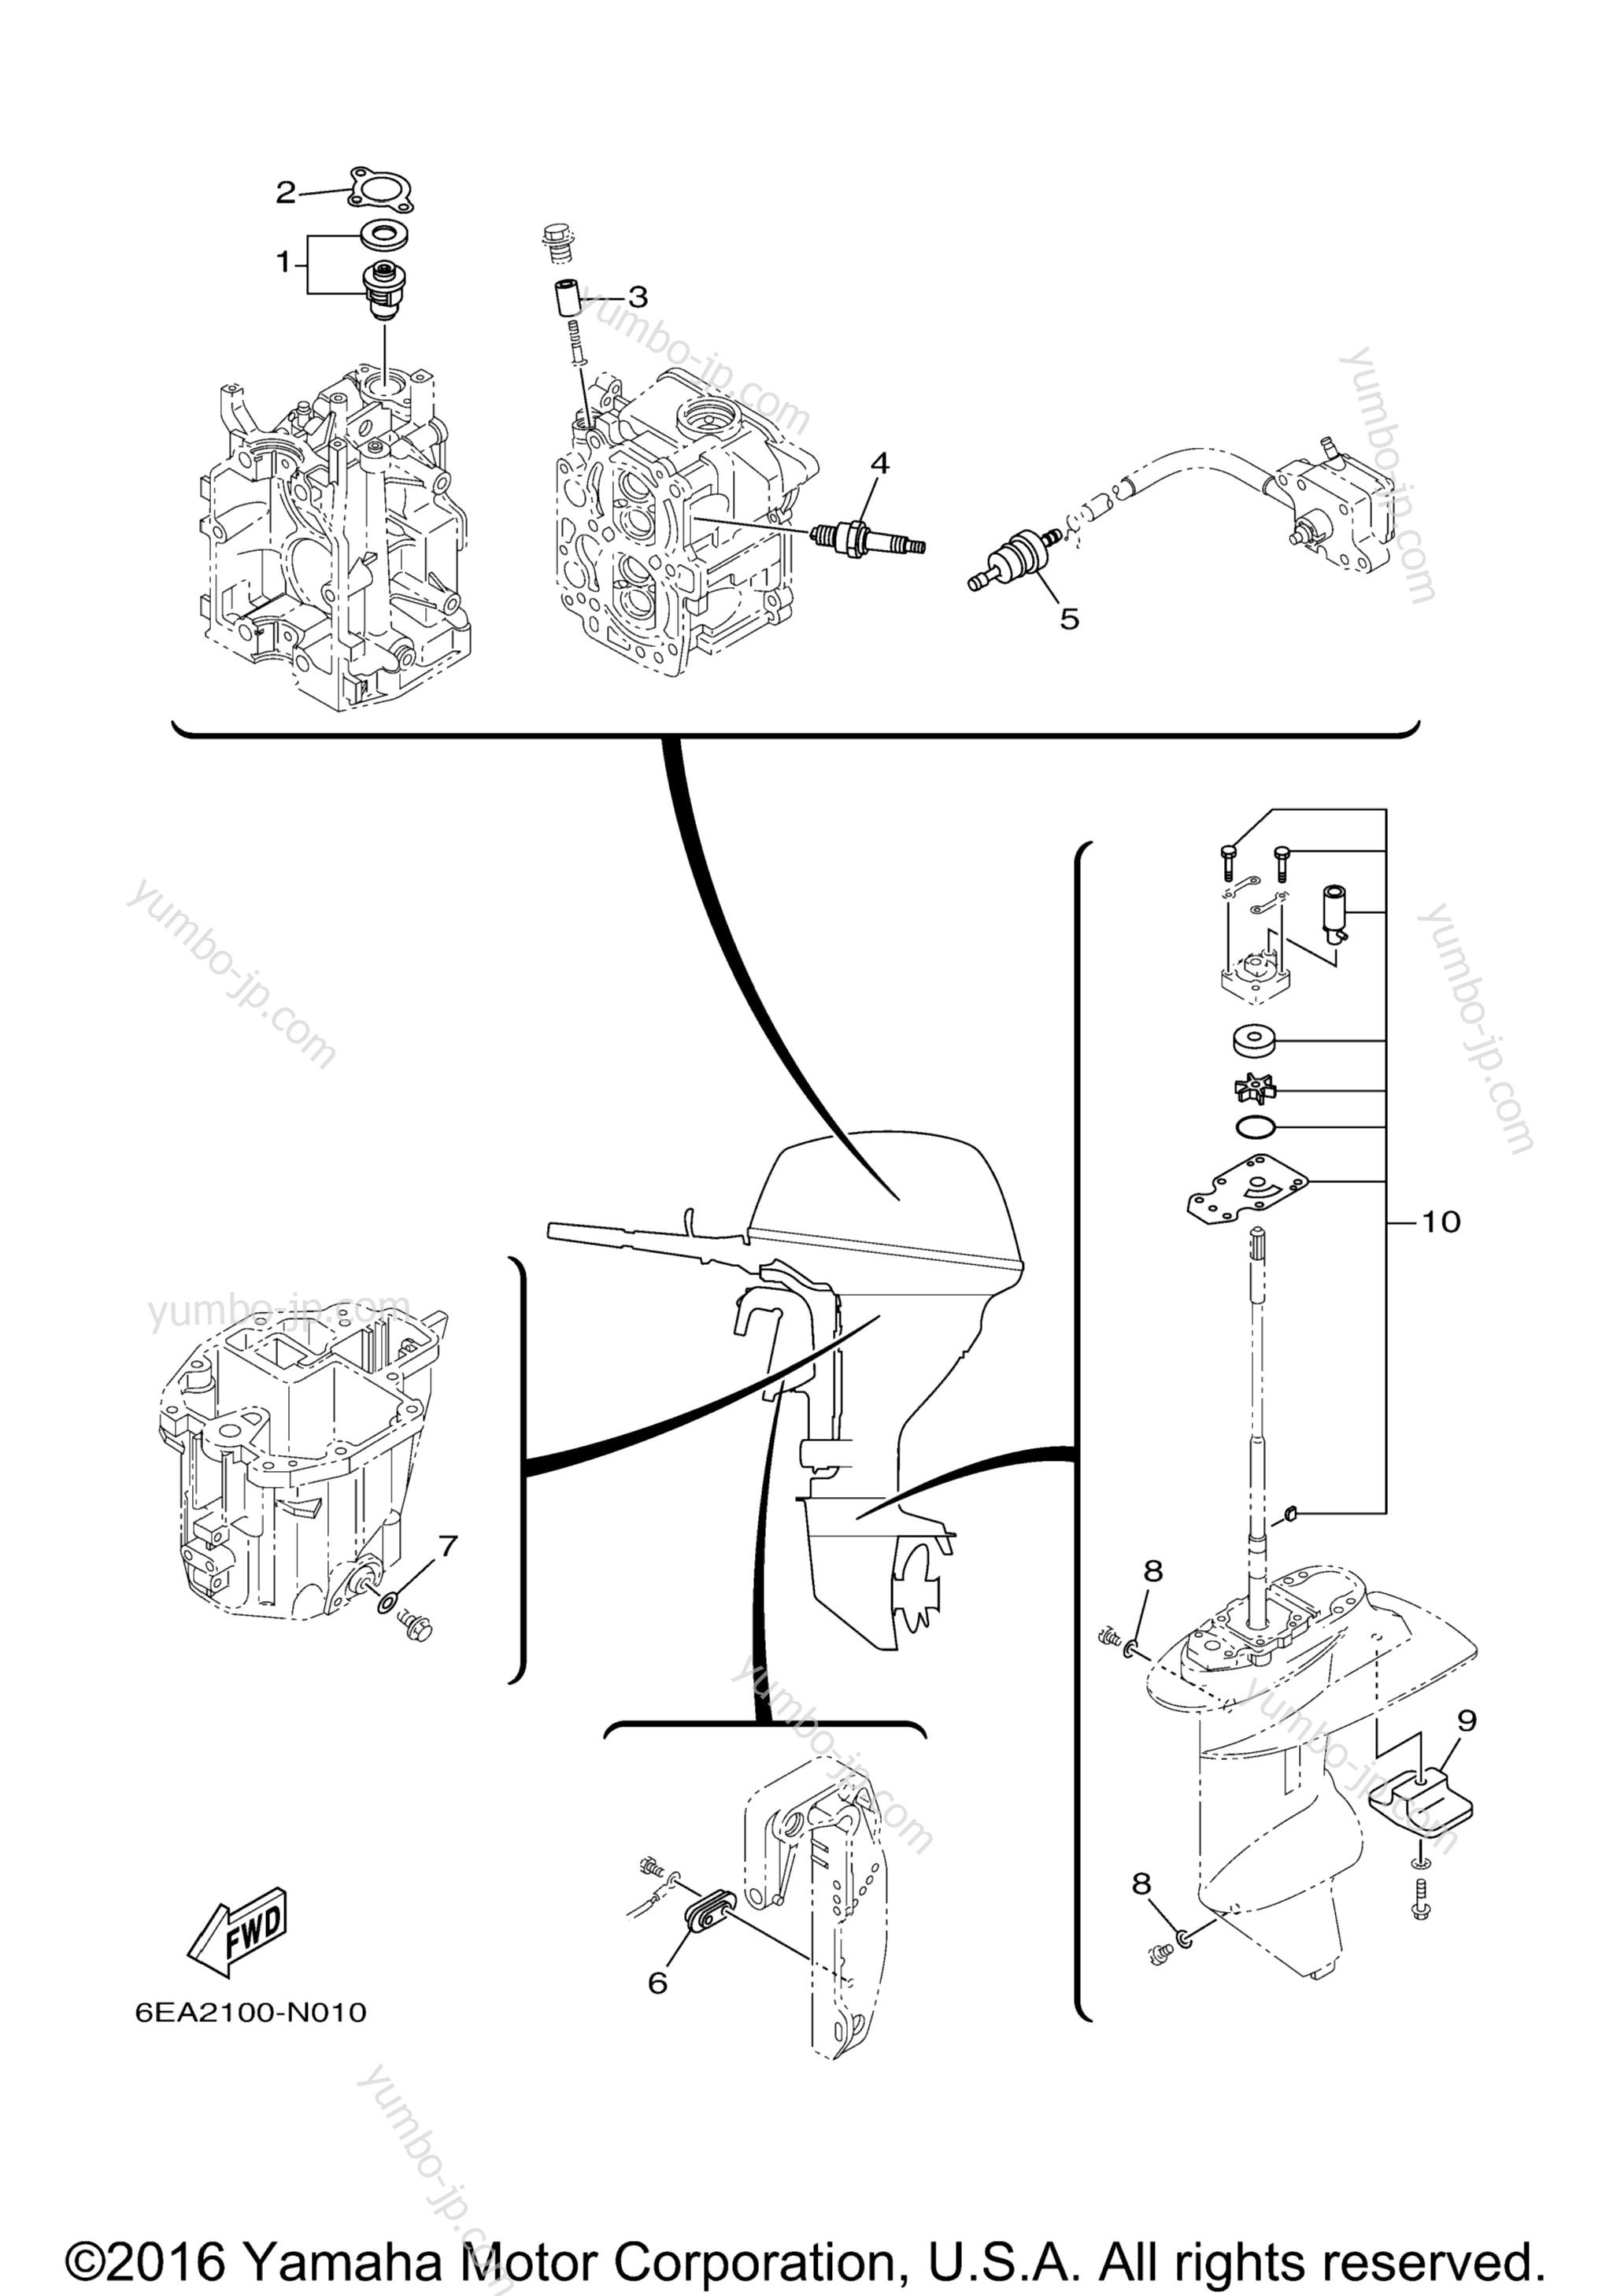 Scheduled Service Parts for outboards YAMAHA T9.9LPHB (0116) 2006 year